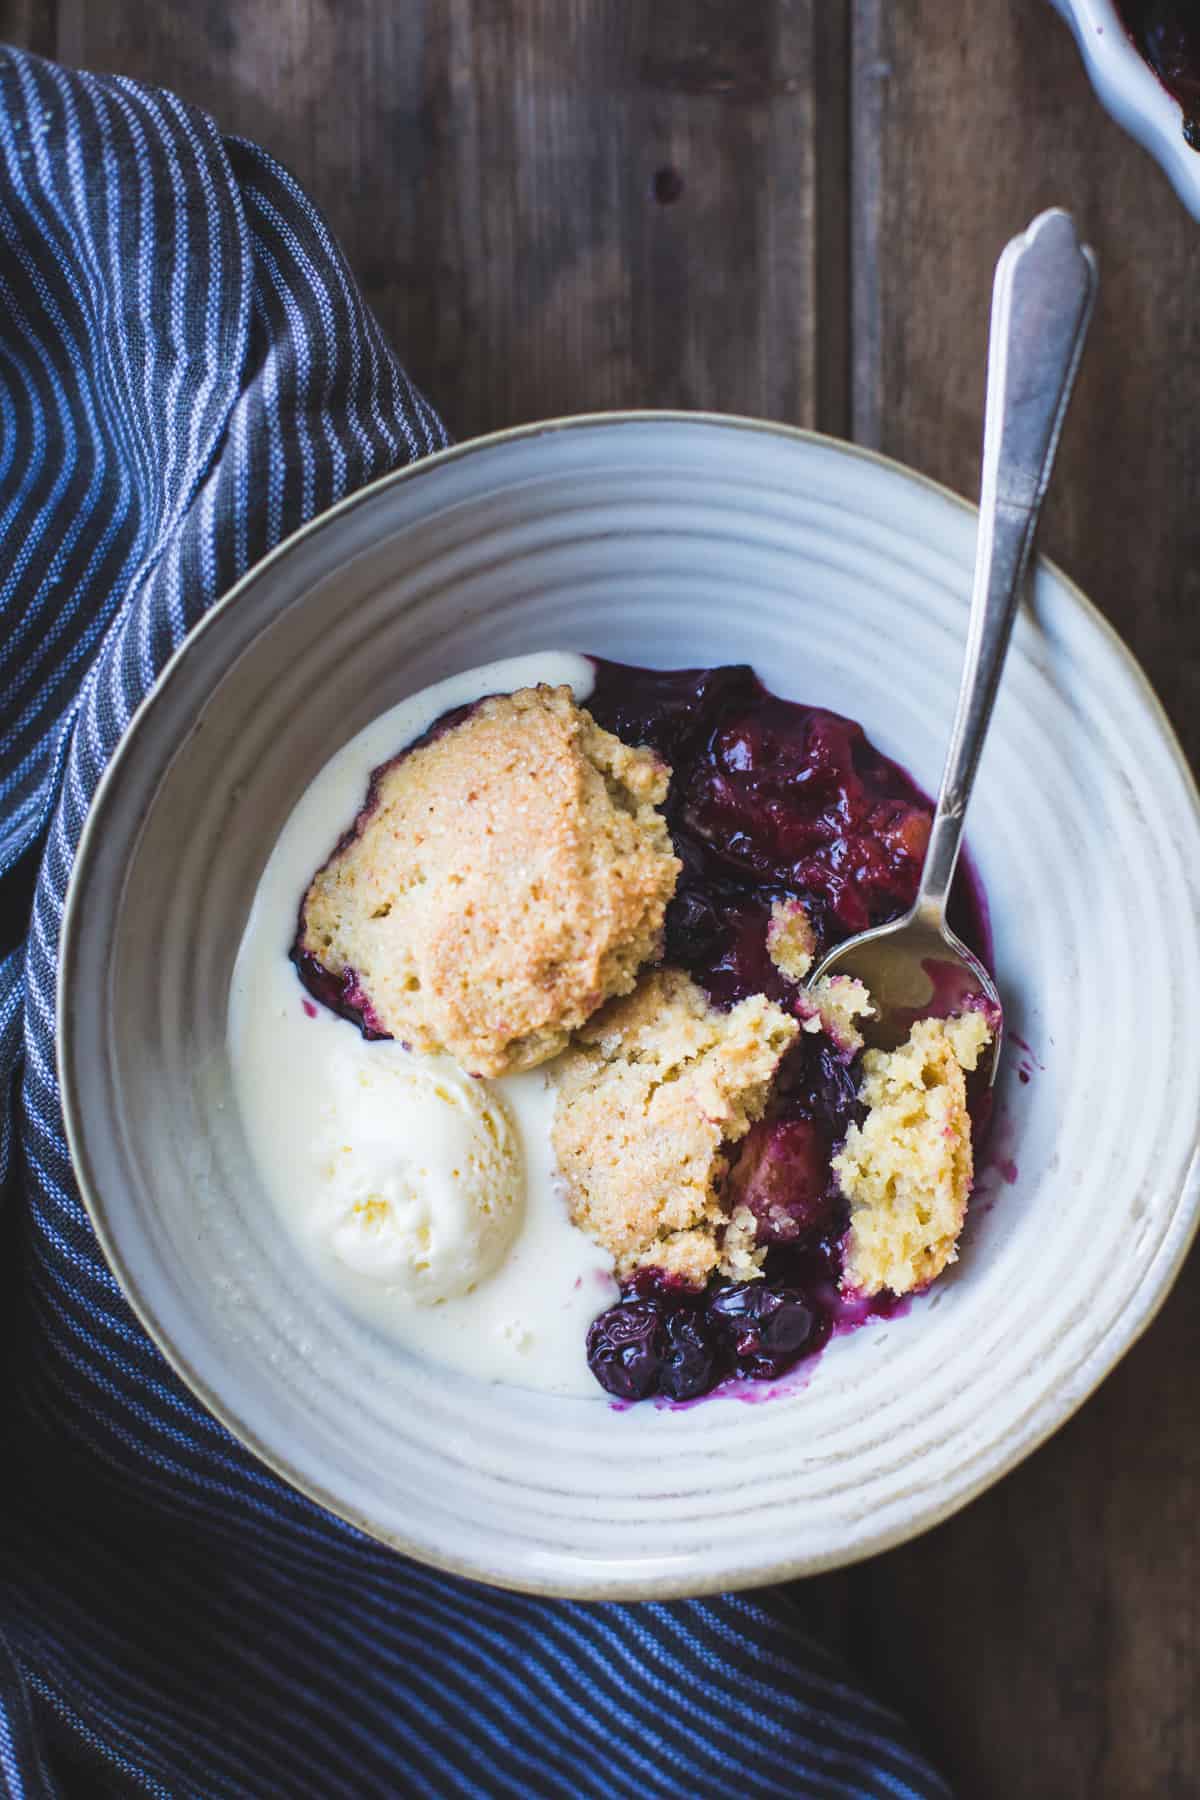 delicious Gluten-Free Blueberry Plum Cobbler with Corn Flour Biscuits